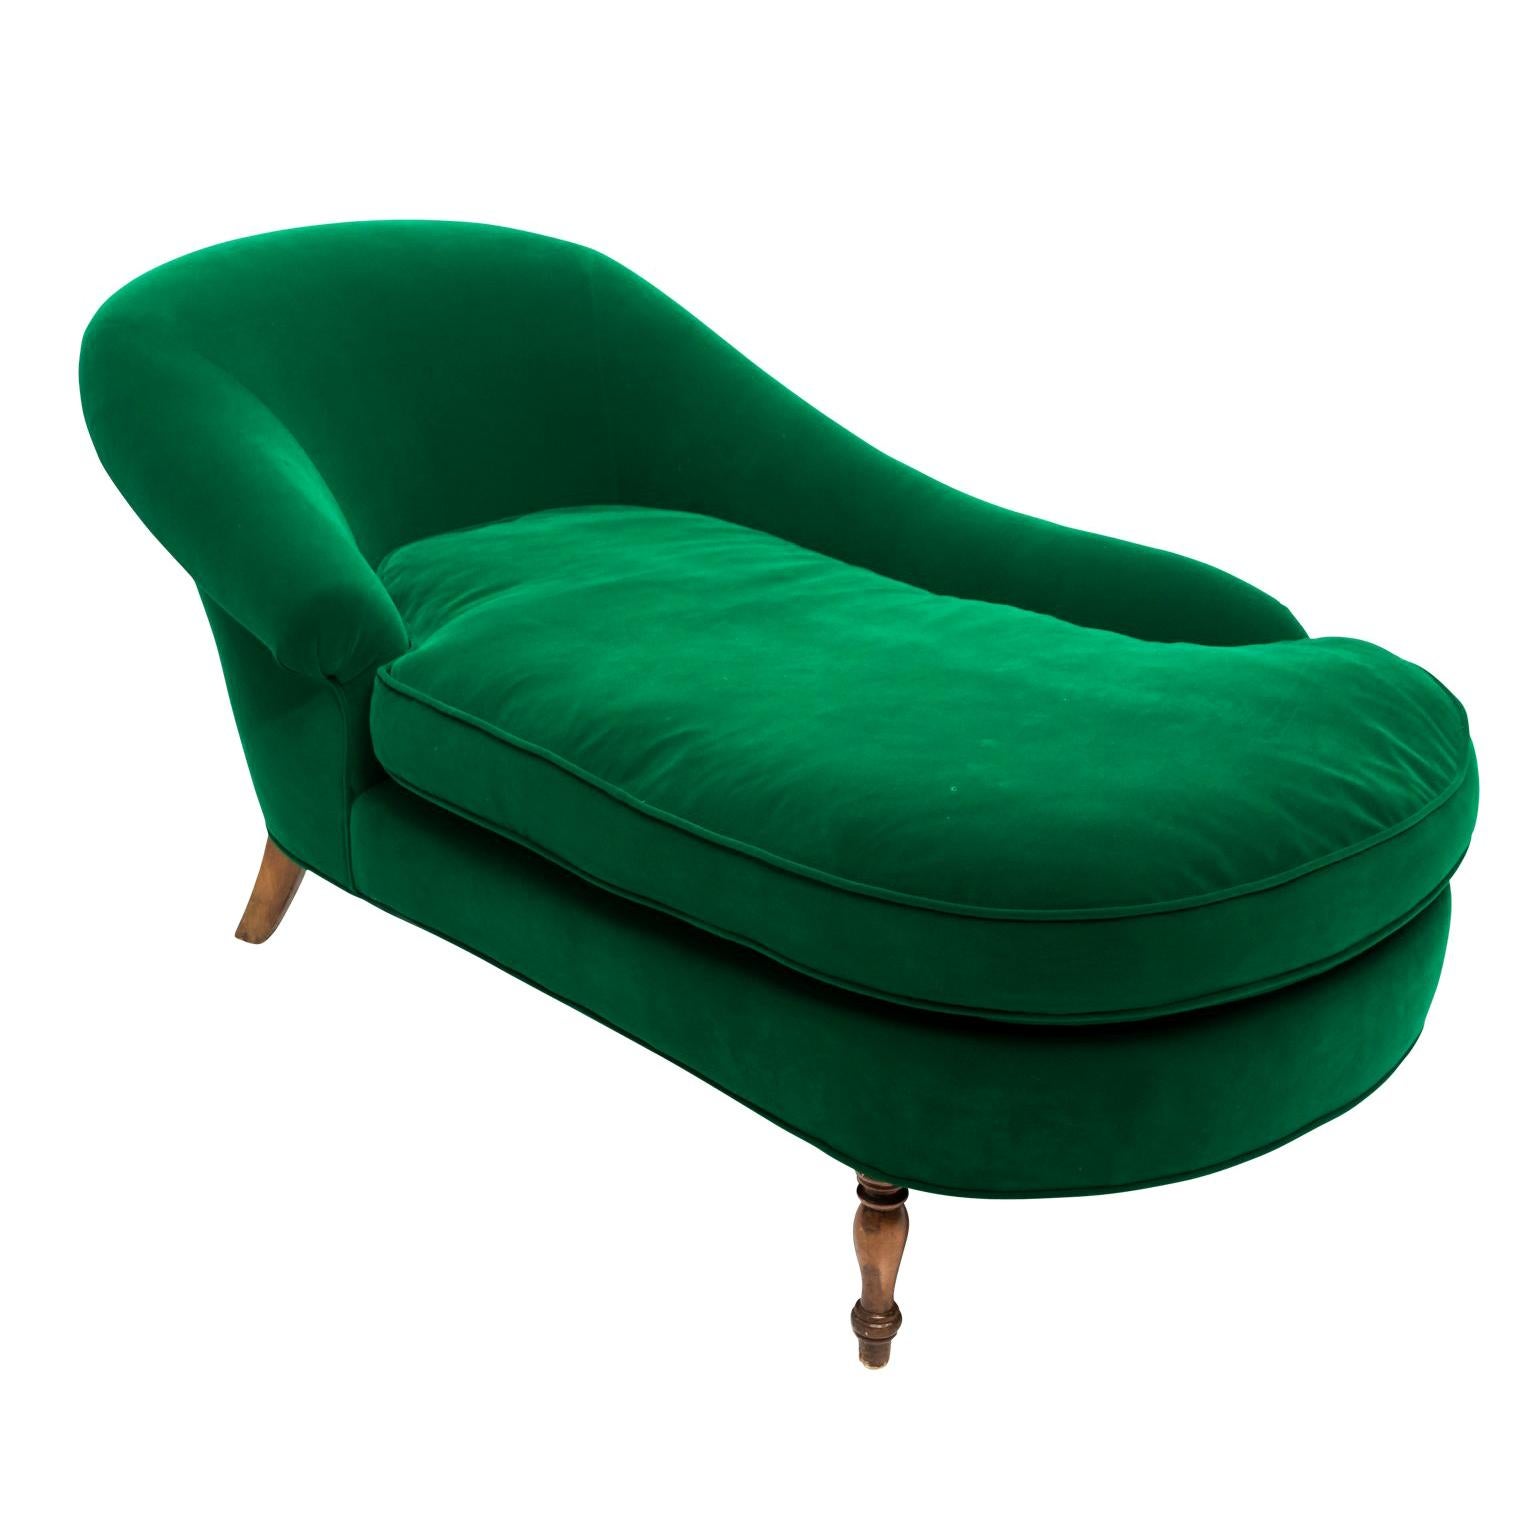 Emerald Upholstered Chaise Lounge Chair